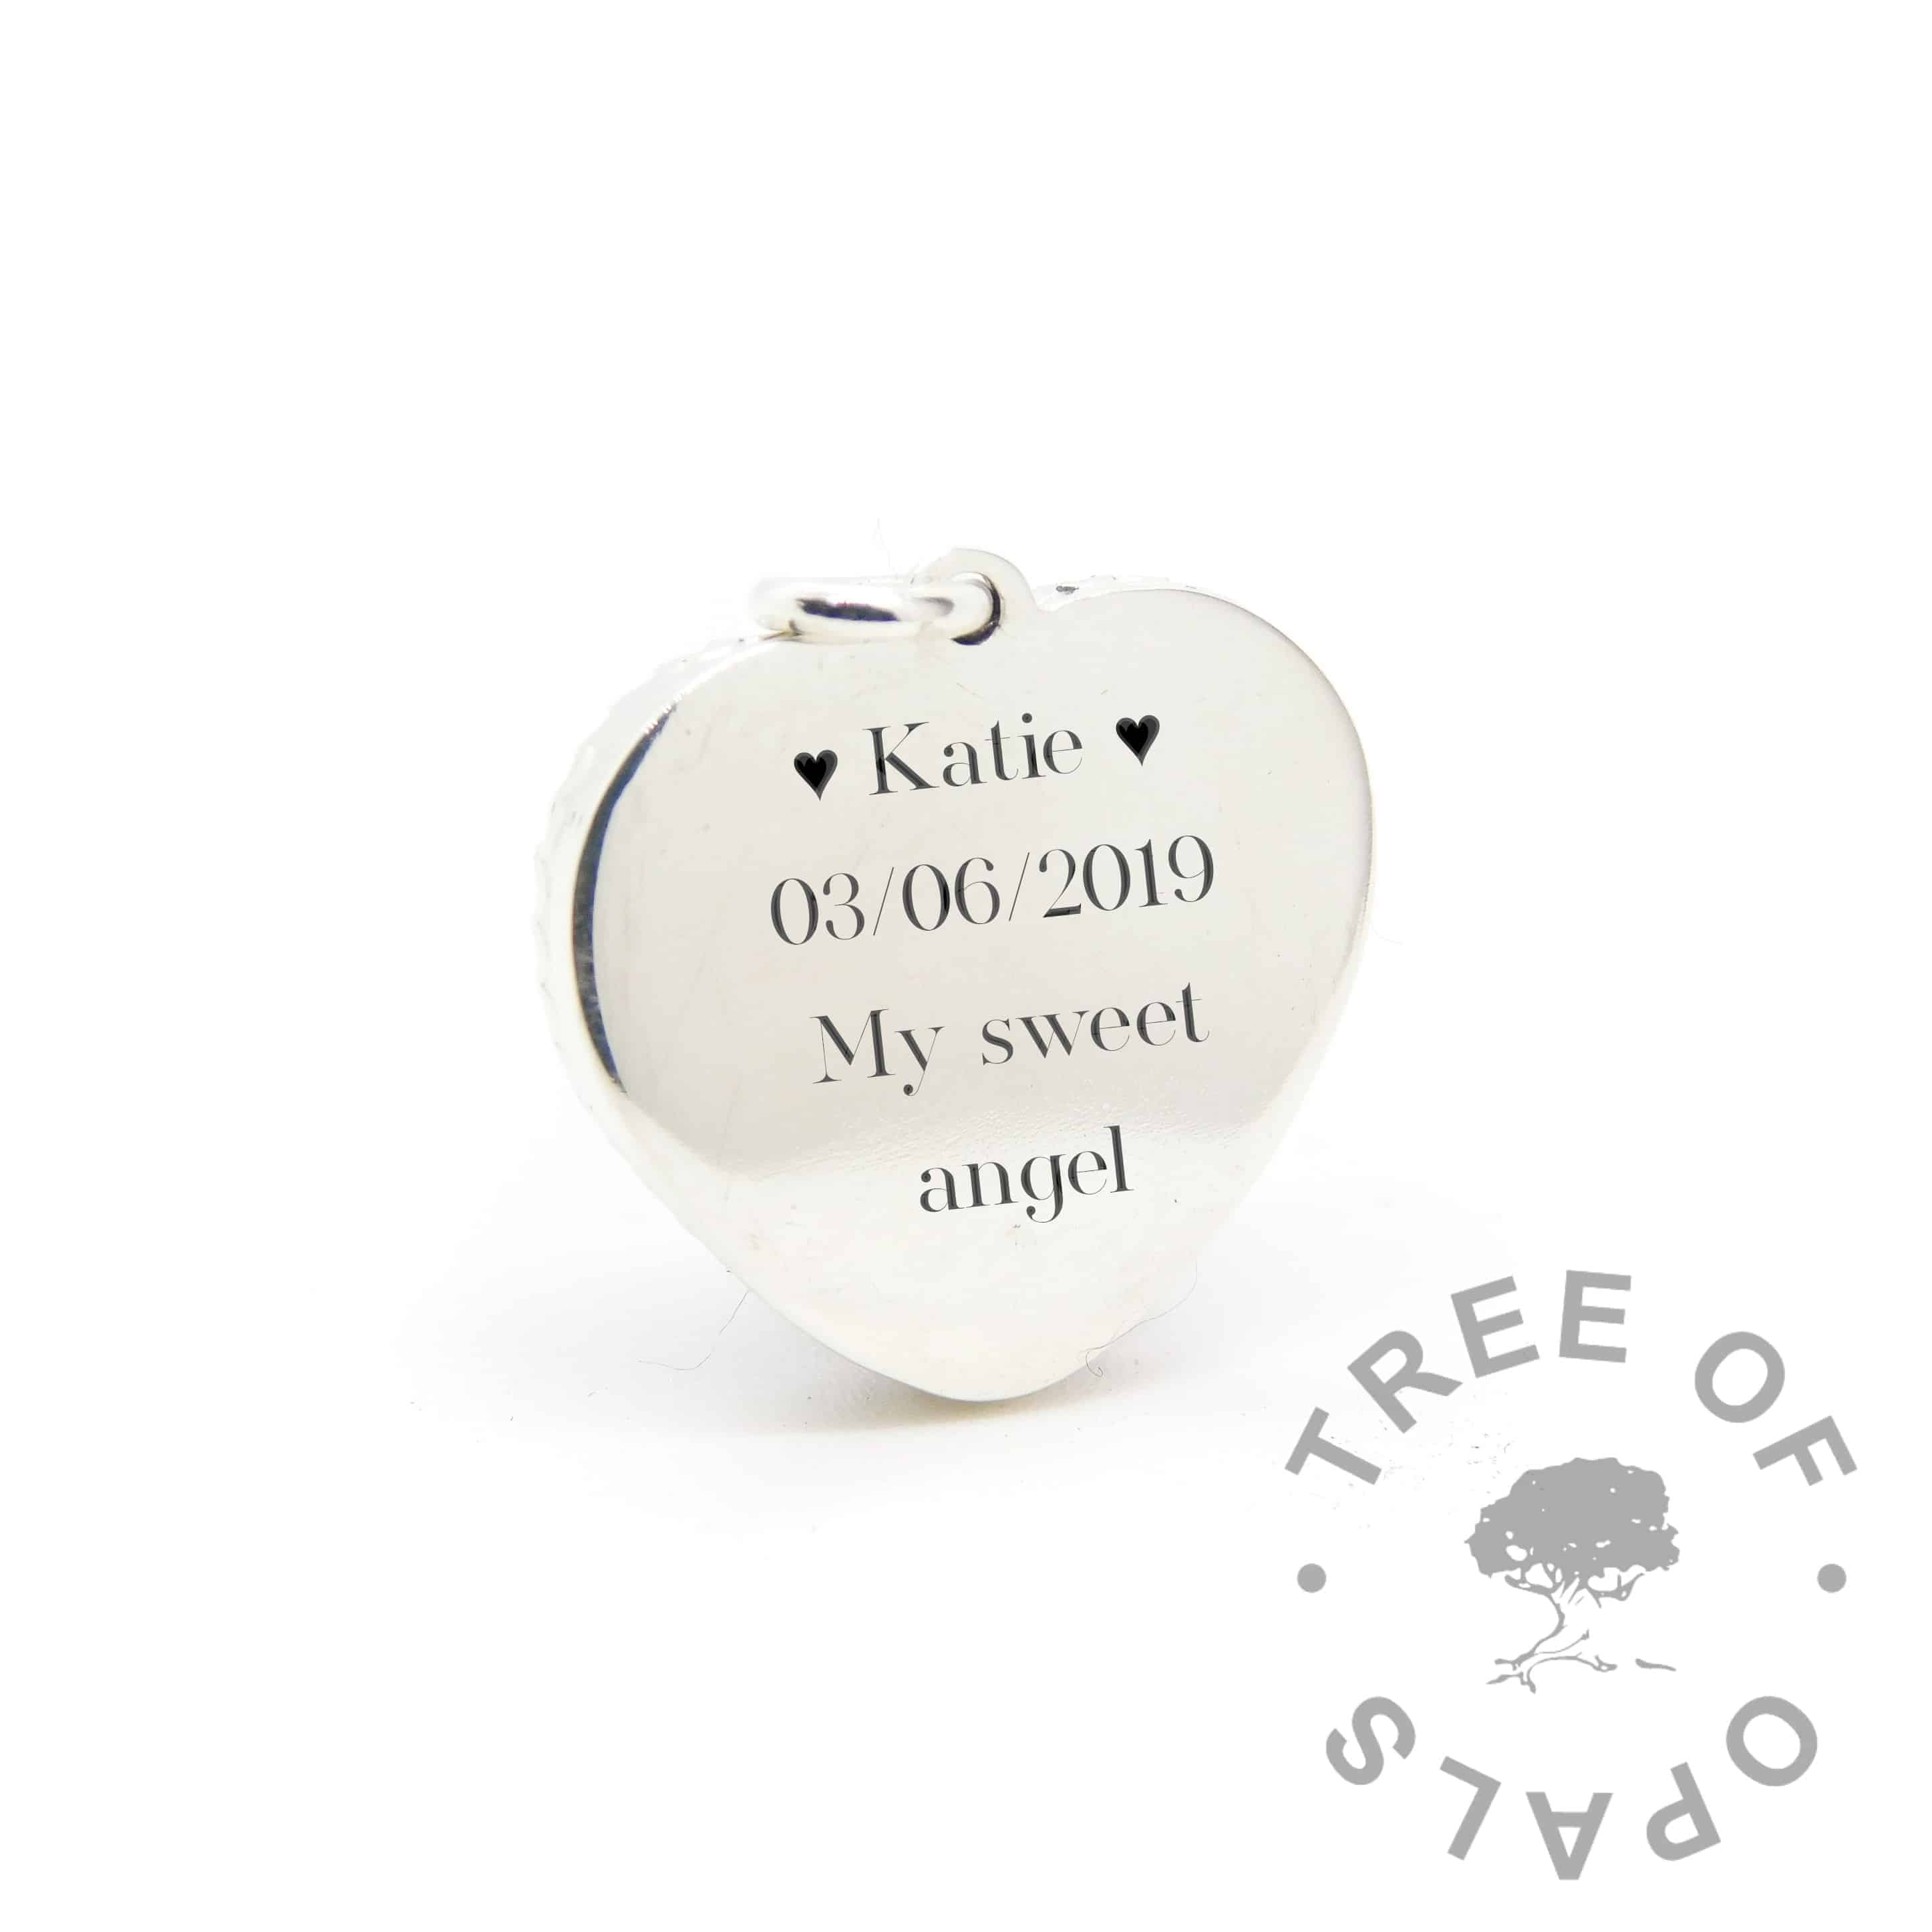 New style heart necklace setting back, with Silver South Serif font and heart emojis engraving mockup (shown without necklace chain)